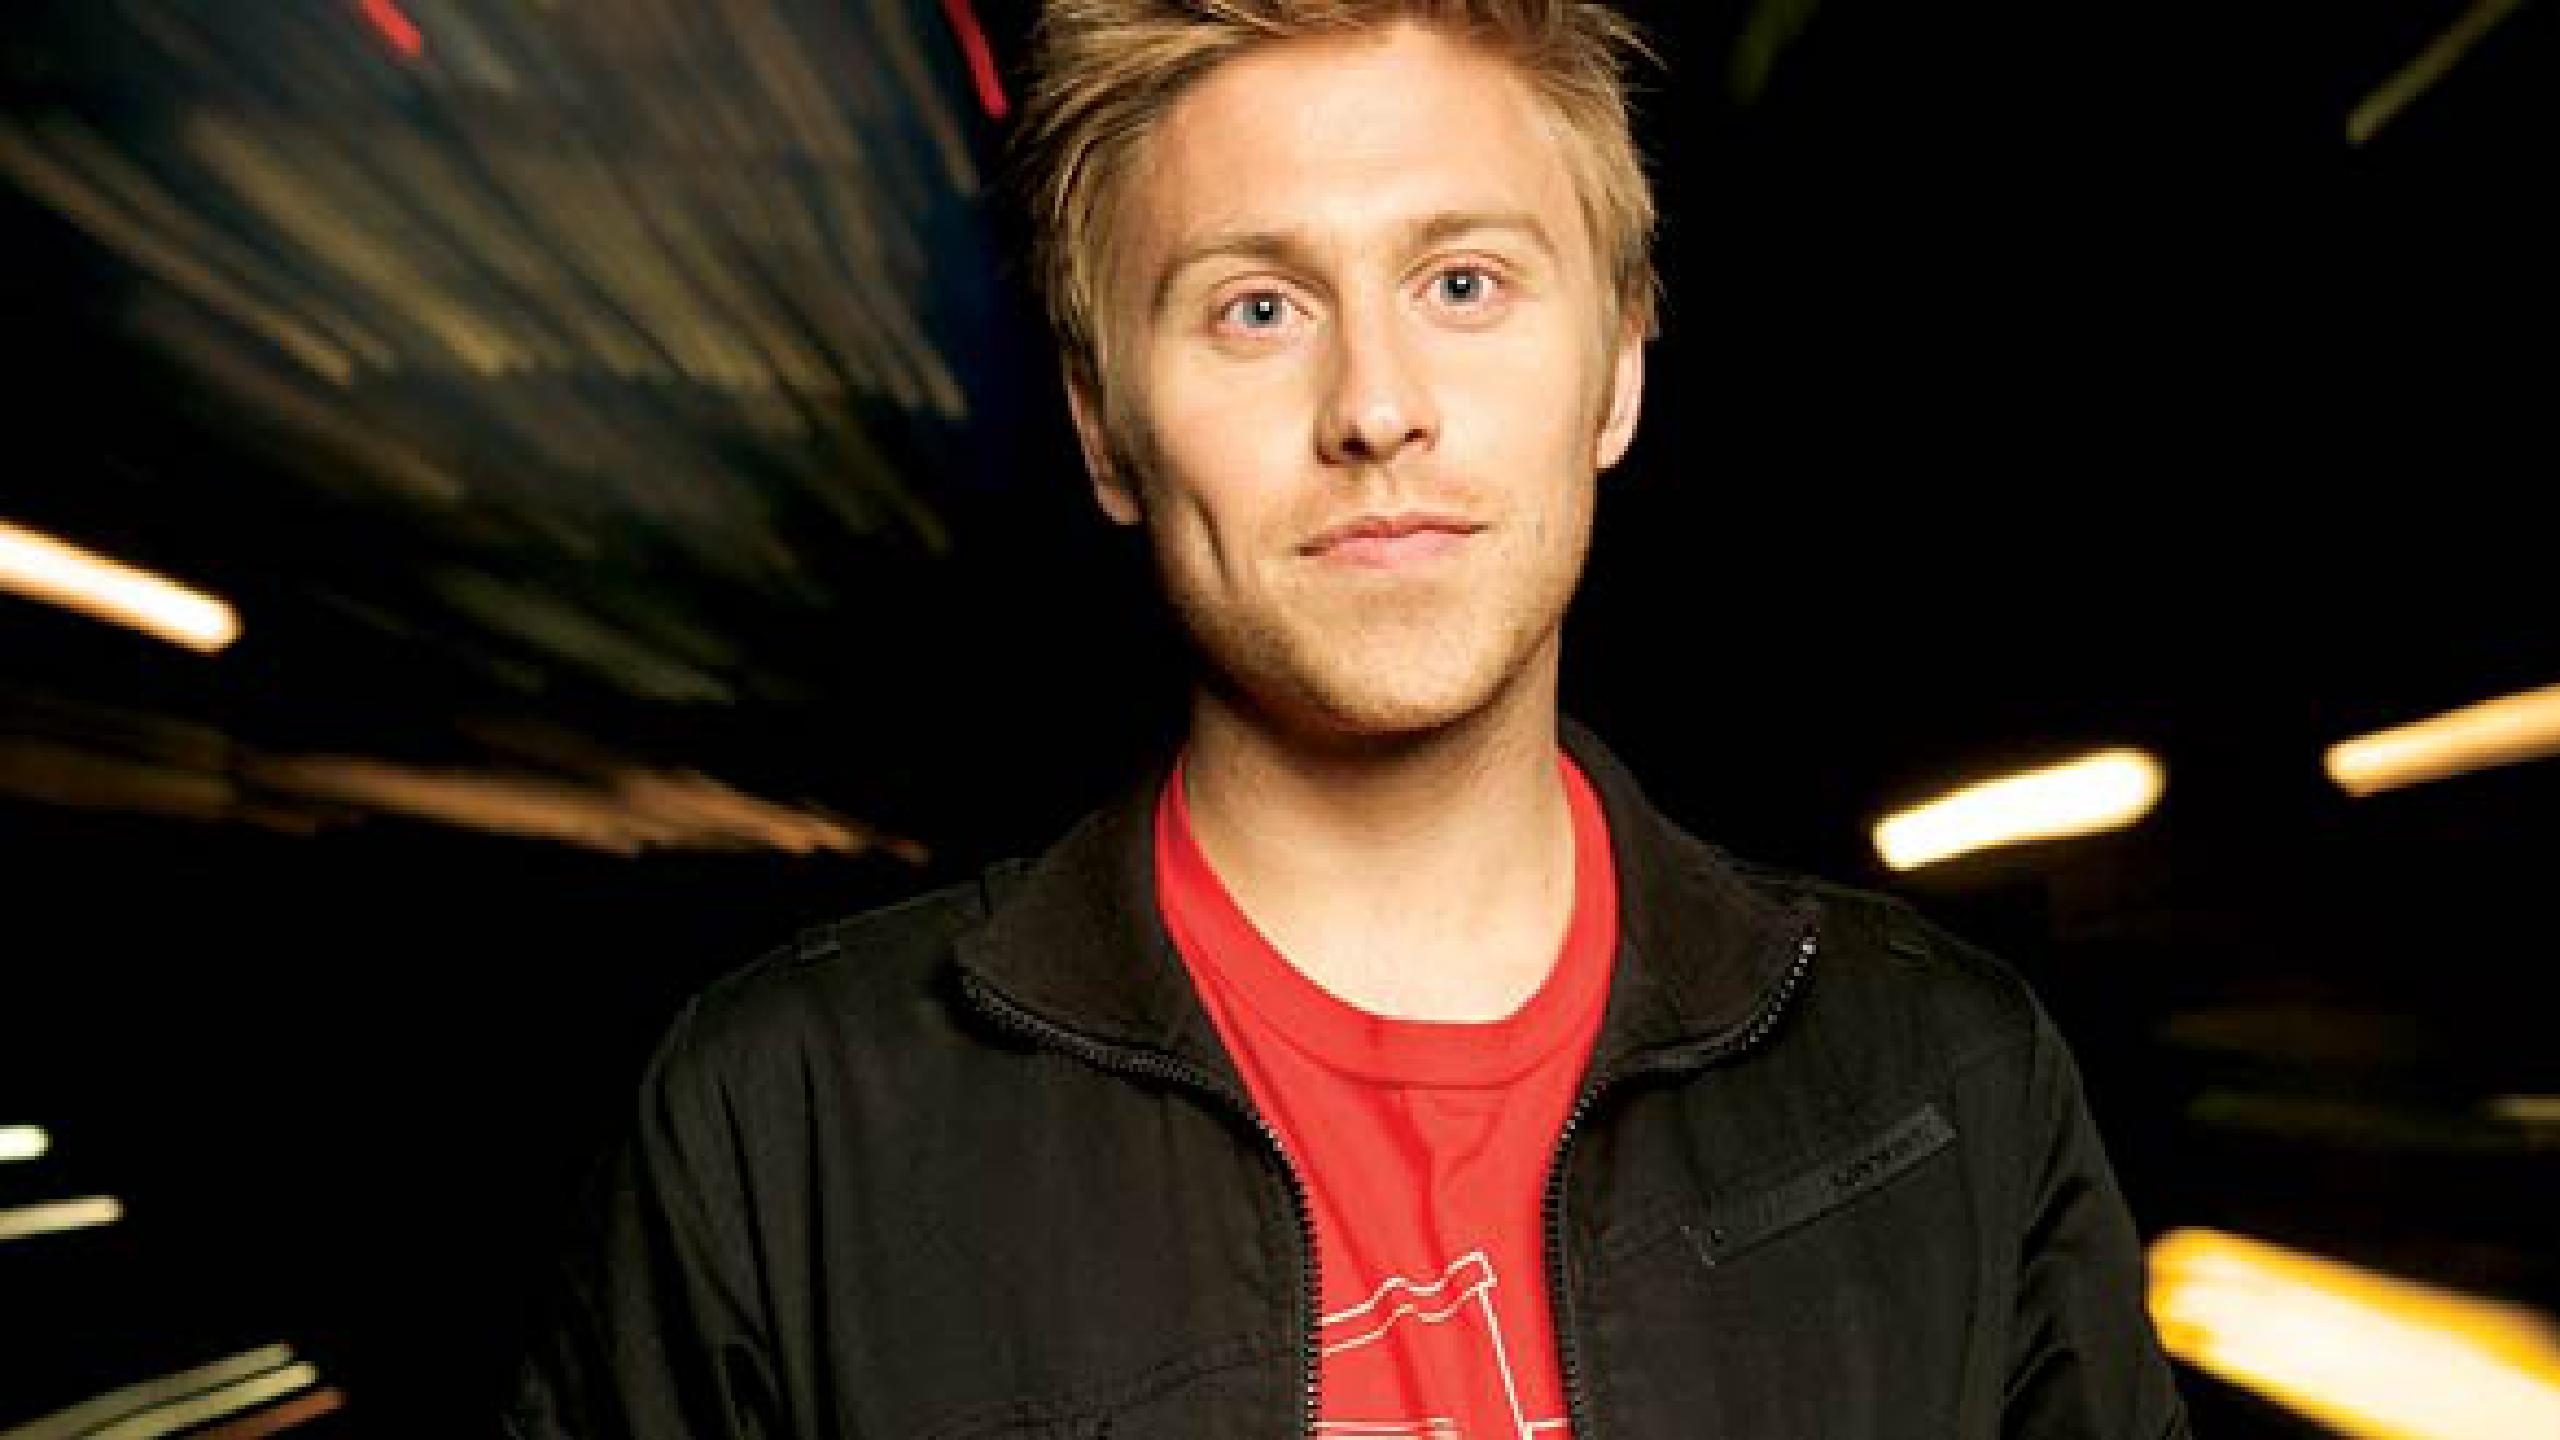 russell howard tour 2023 running time